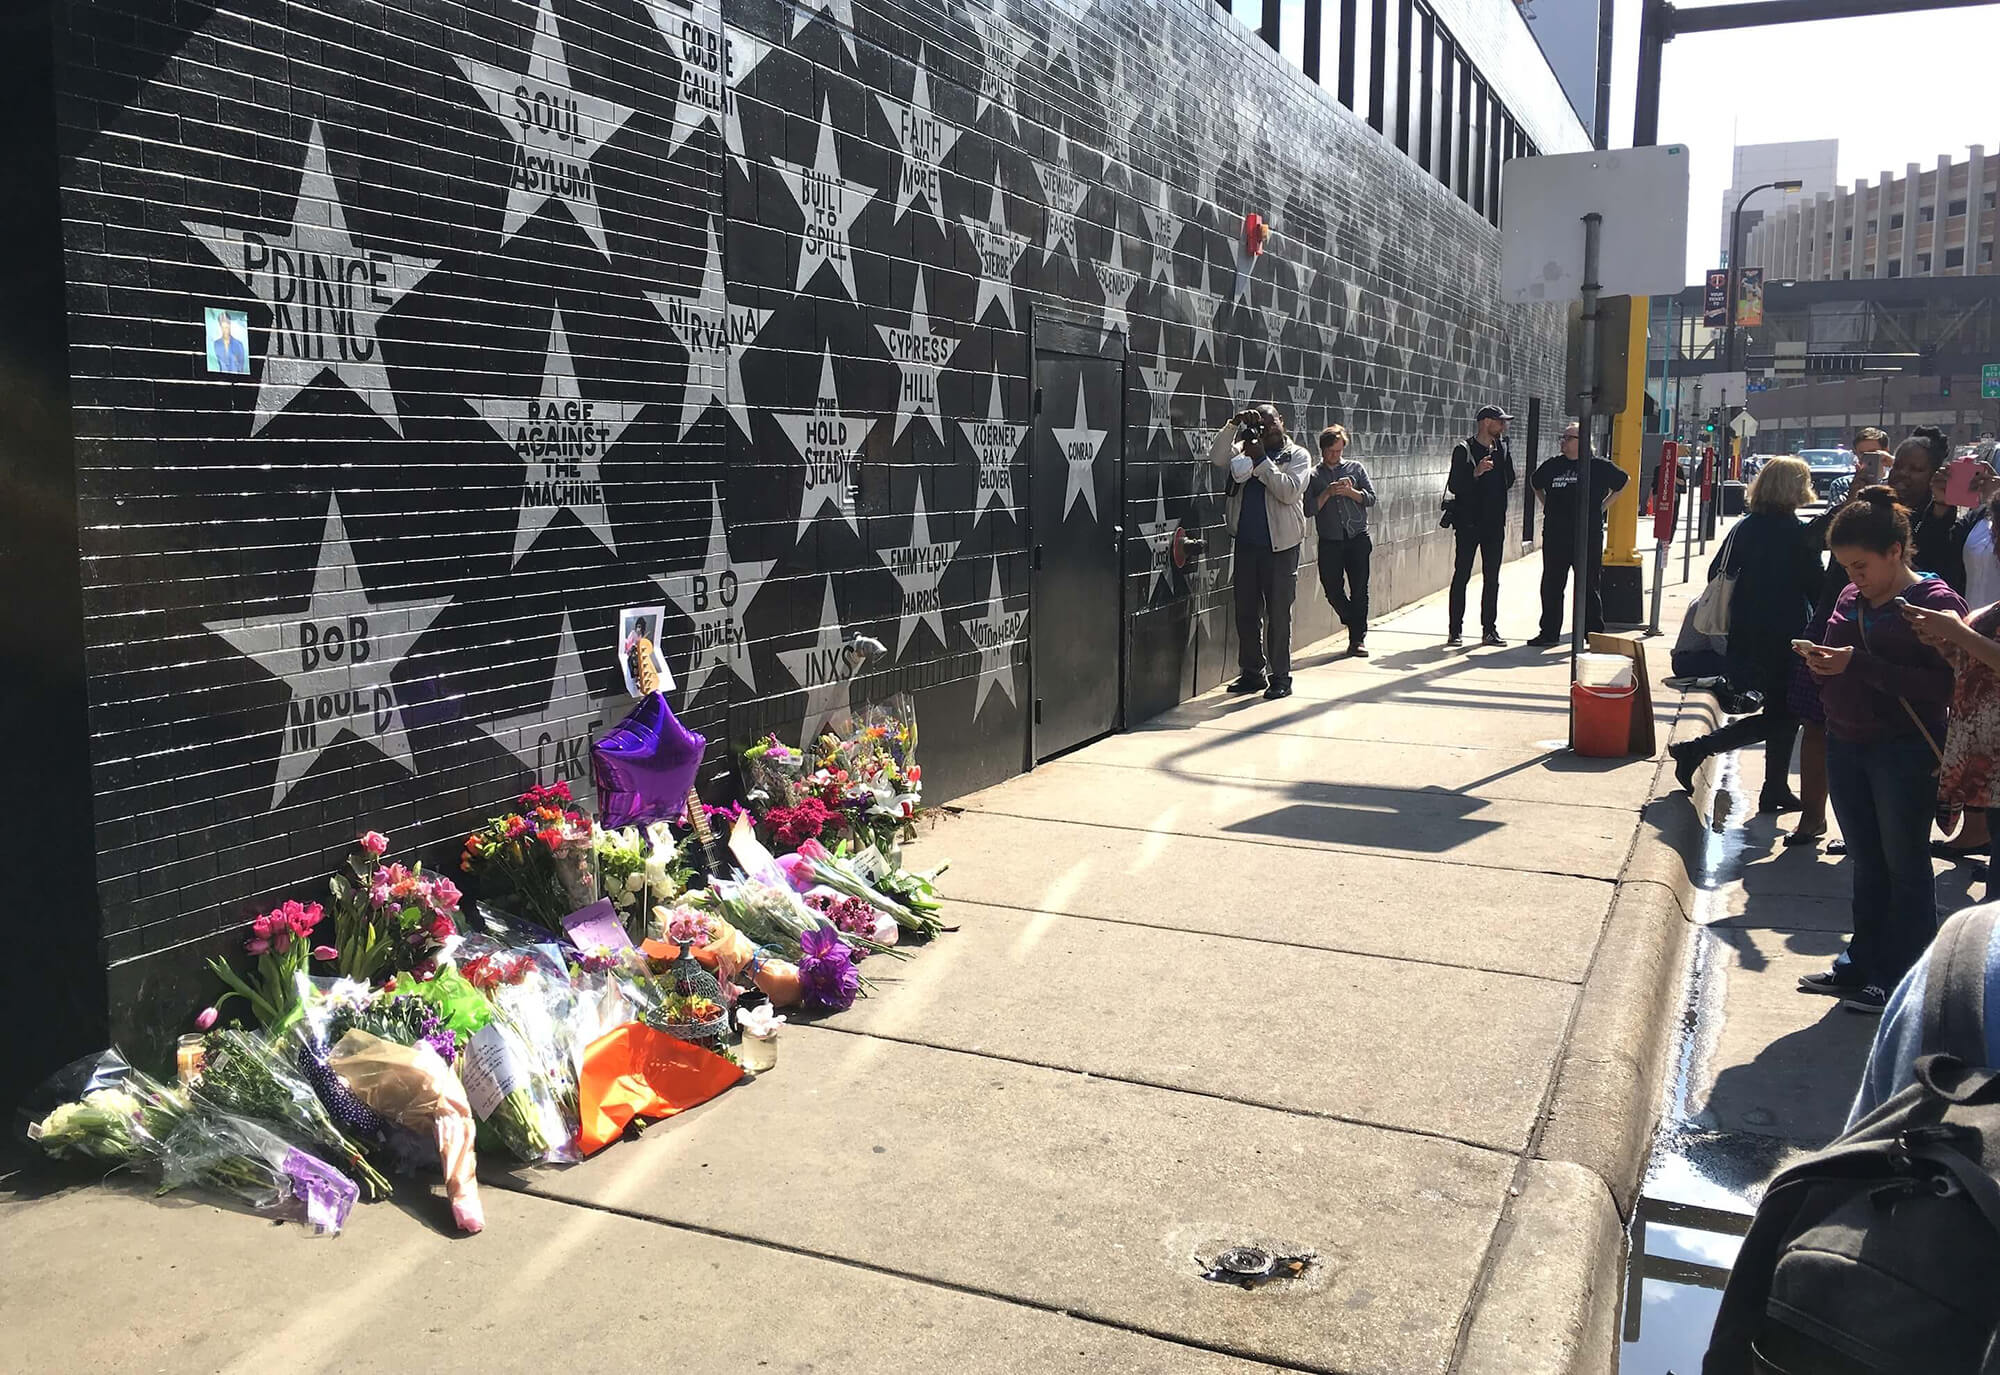 First Avenue lined with flowers to create a memorial to the artist Prince